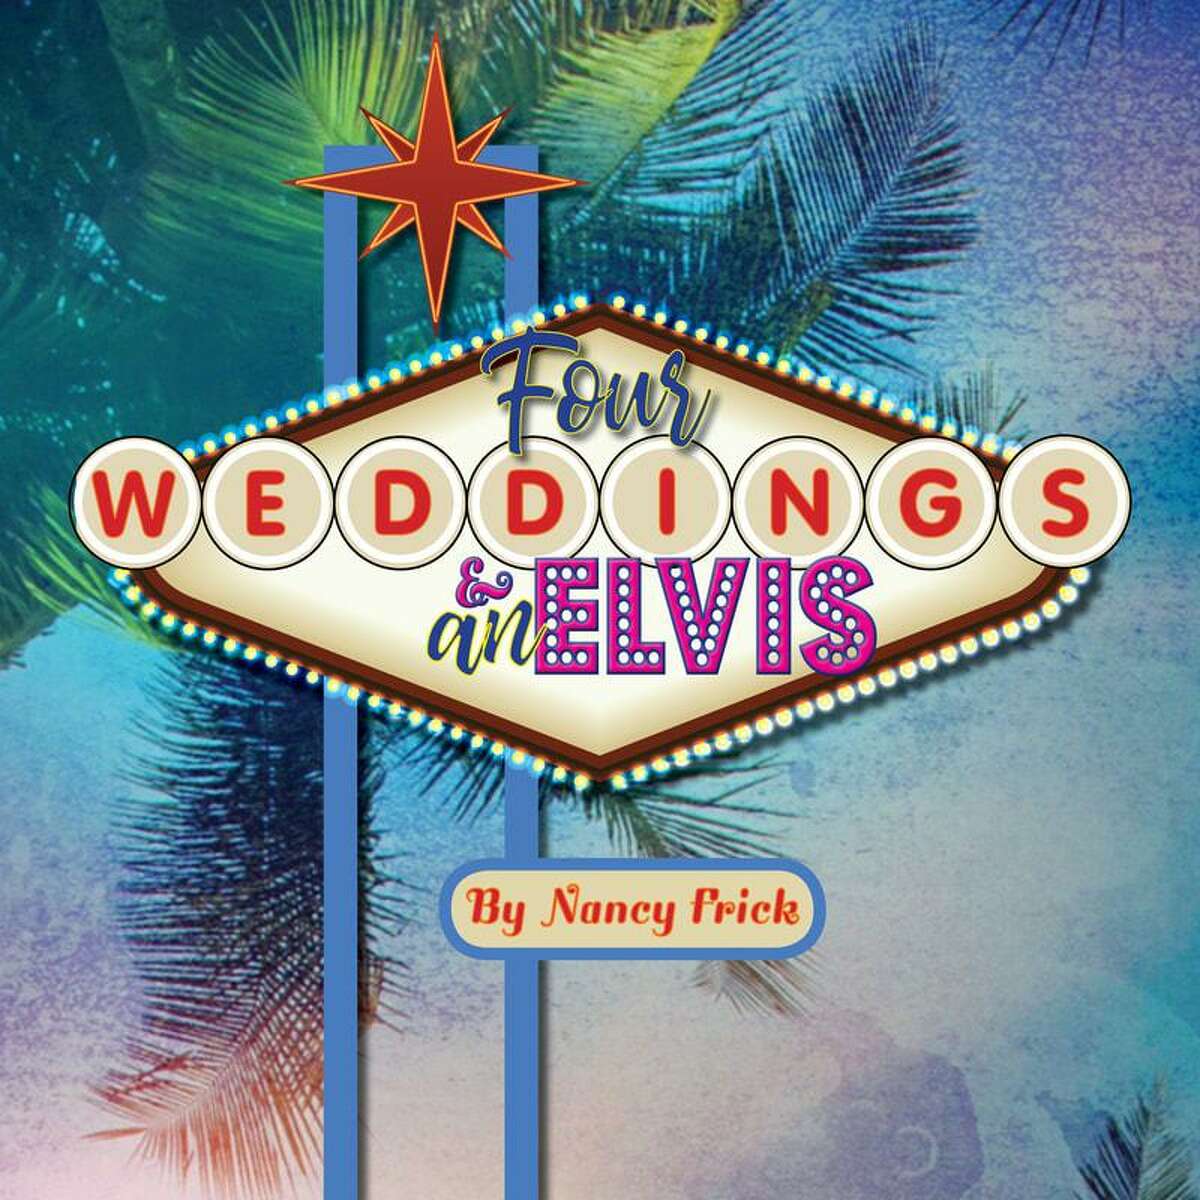 Eastbound Theatre will hold auditions for Four Weddings and An Elvis on Tuesday, Nov. 12, from 7-9 p.m., at the MAC, and Thursday, Nov. 14, from 7-9 p.m., at the Margaret Egan Center.